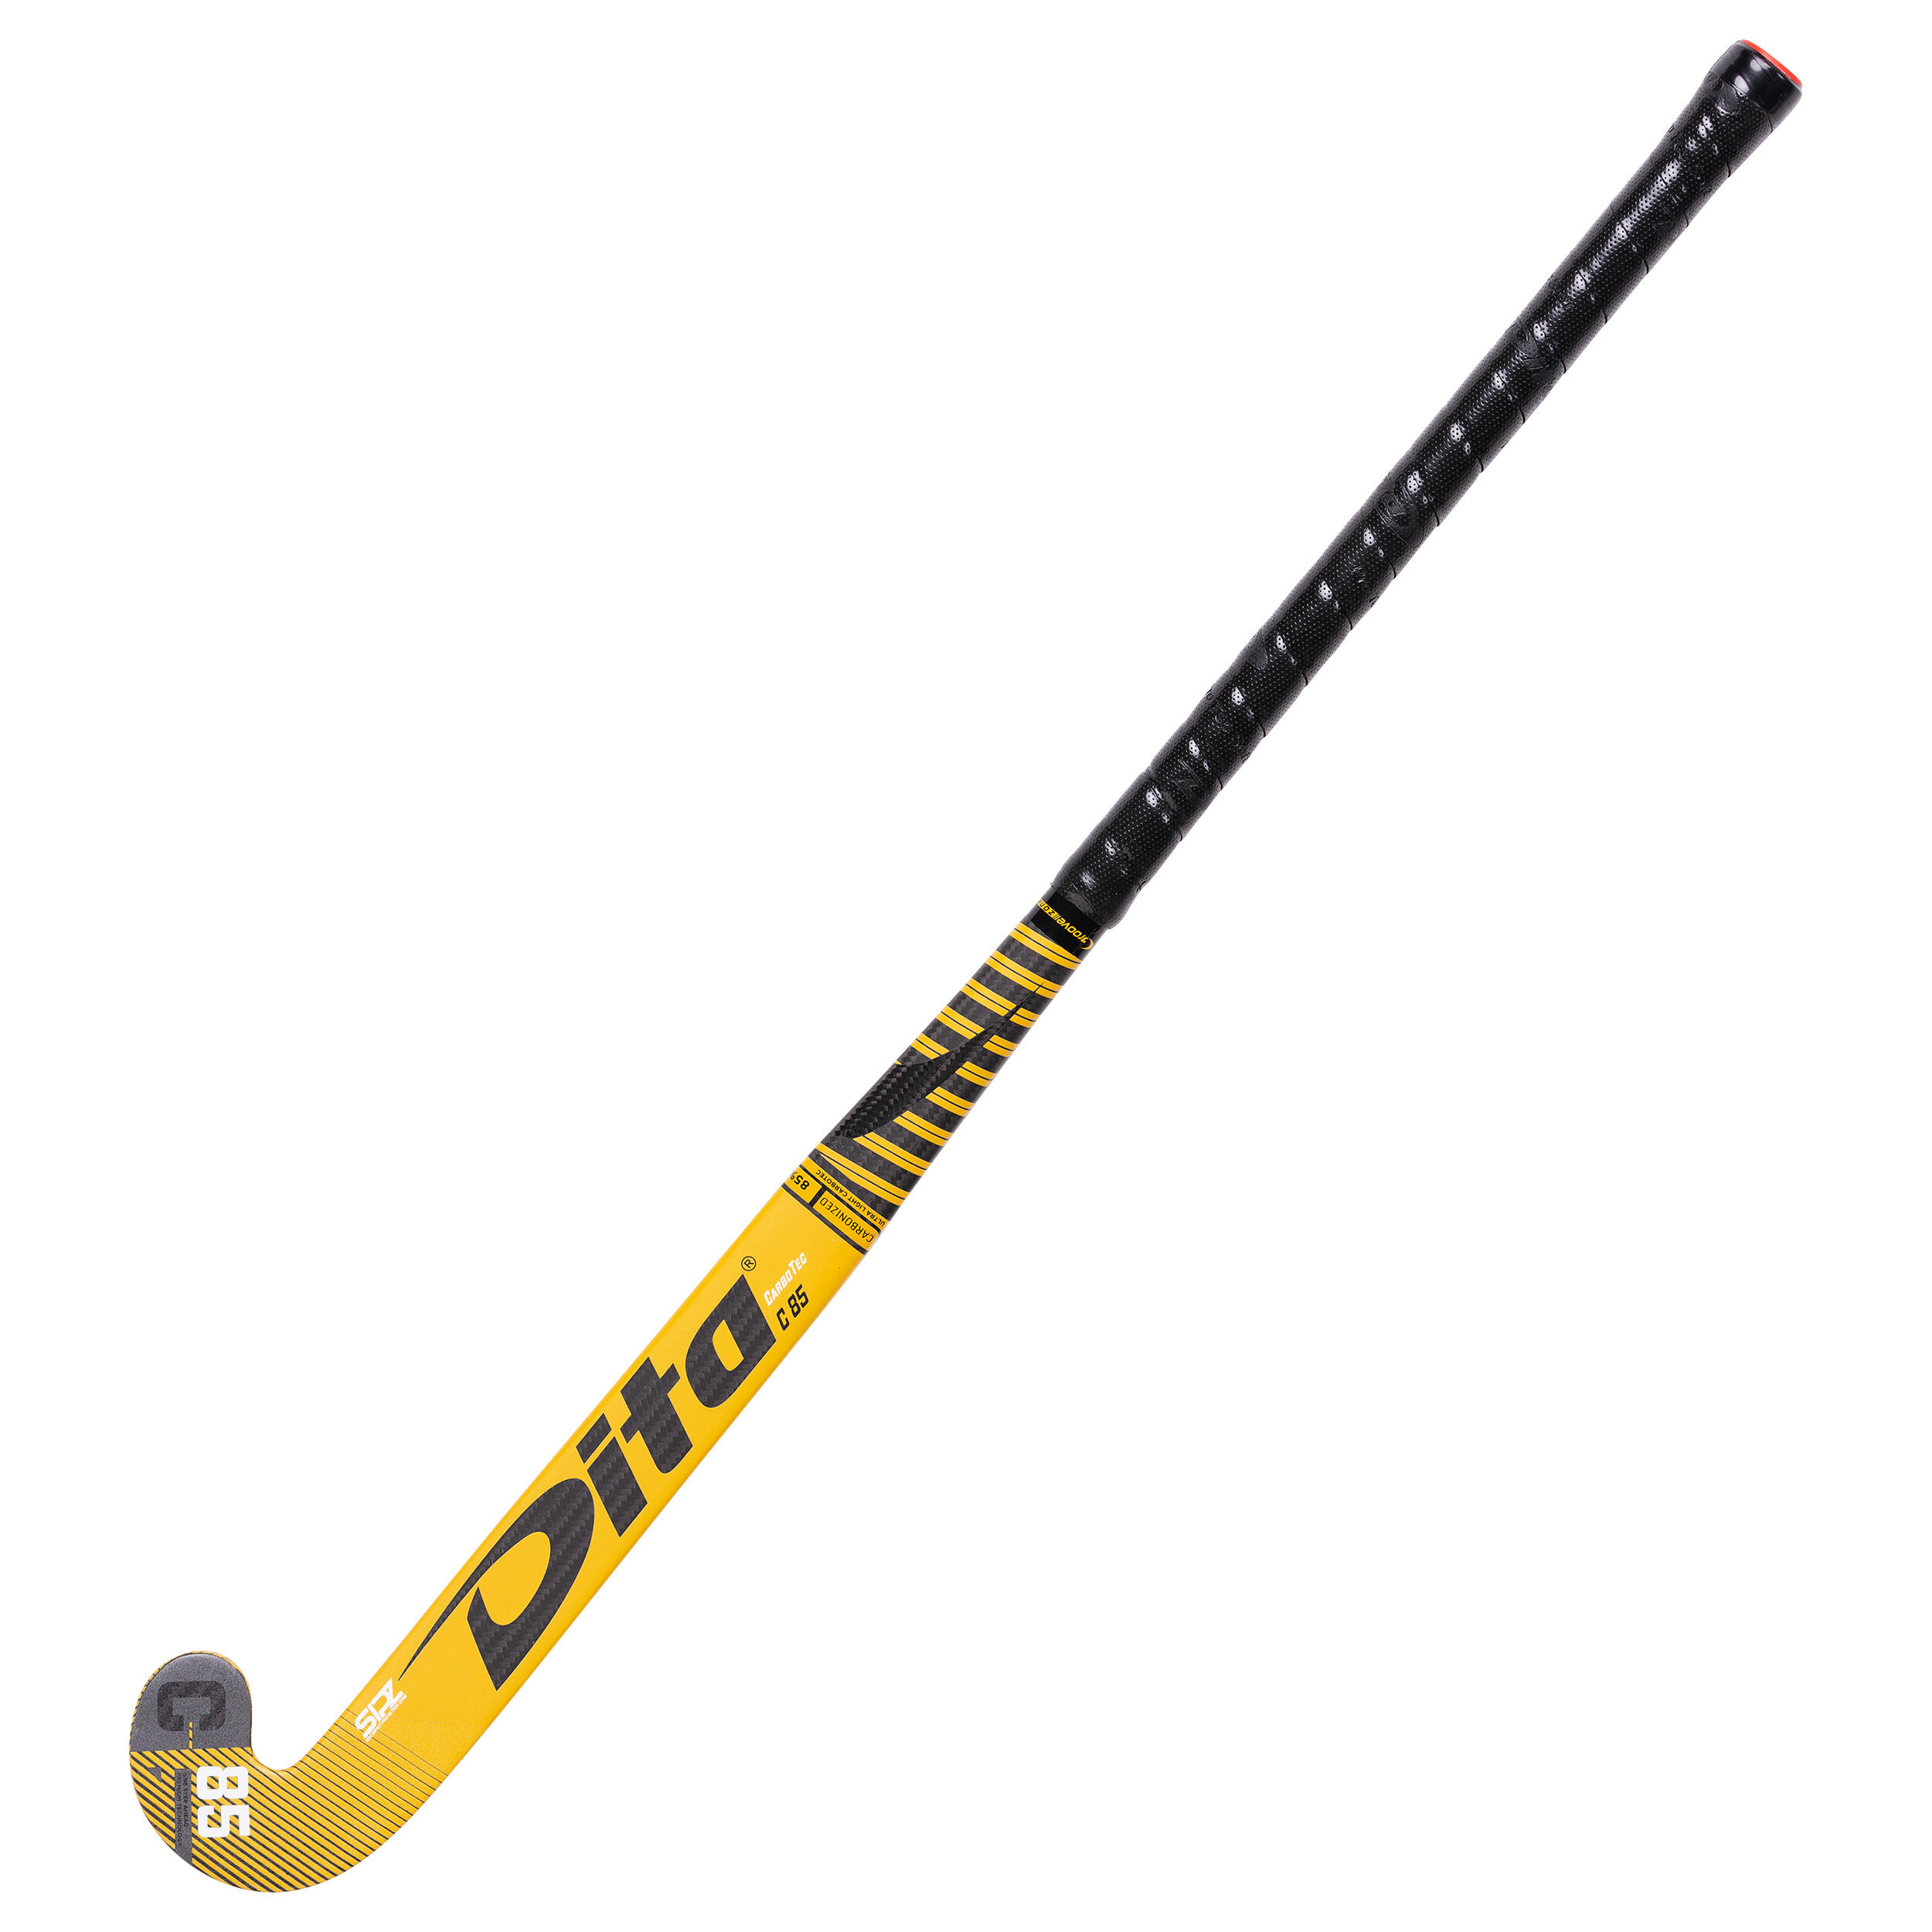 Adult Advanced 85% Carbon X Low Bow Field Hockey Stick carbotecC85 - Gold/Black 9/13